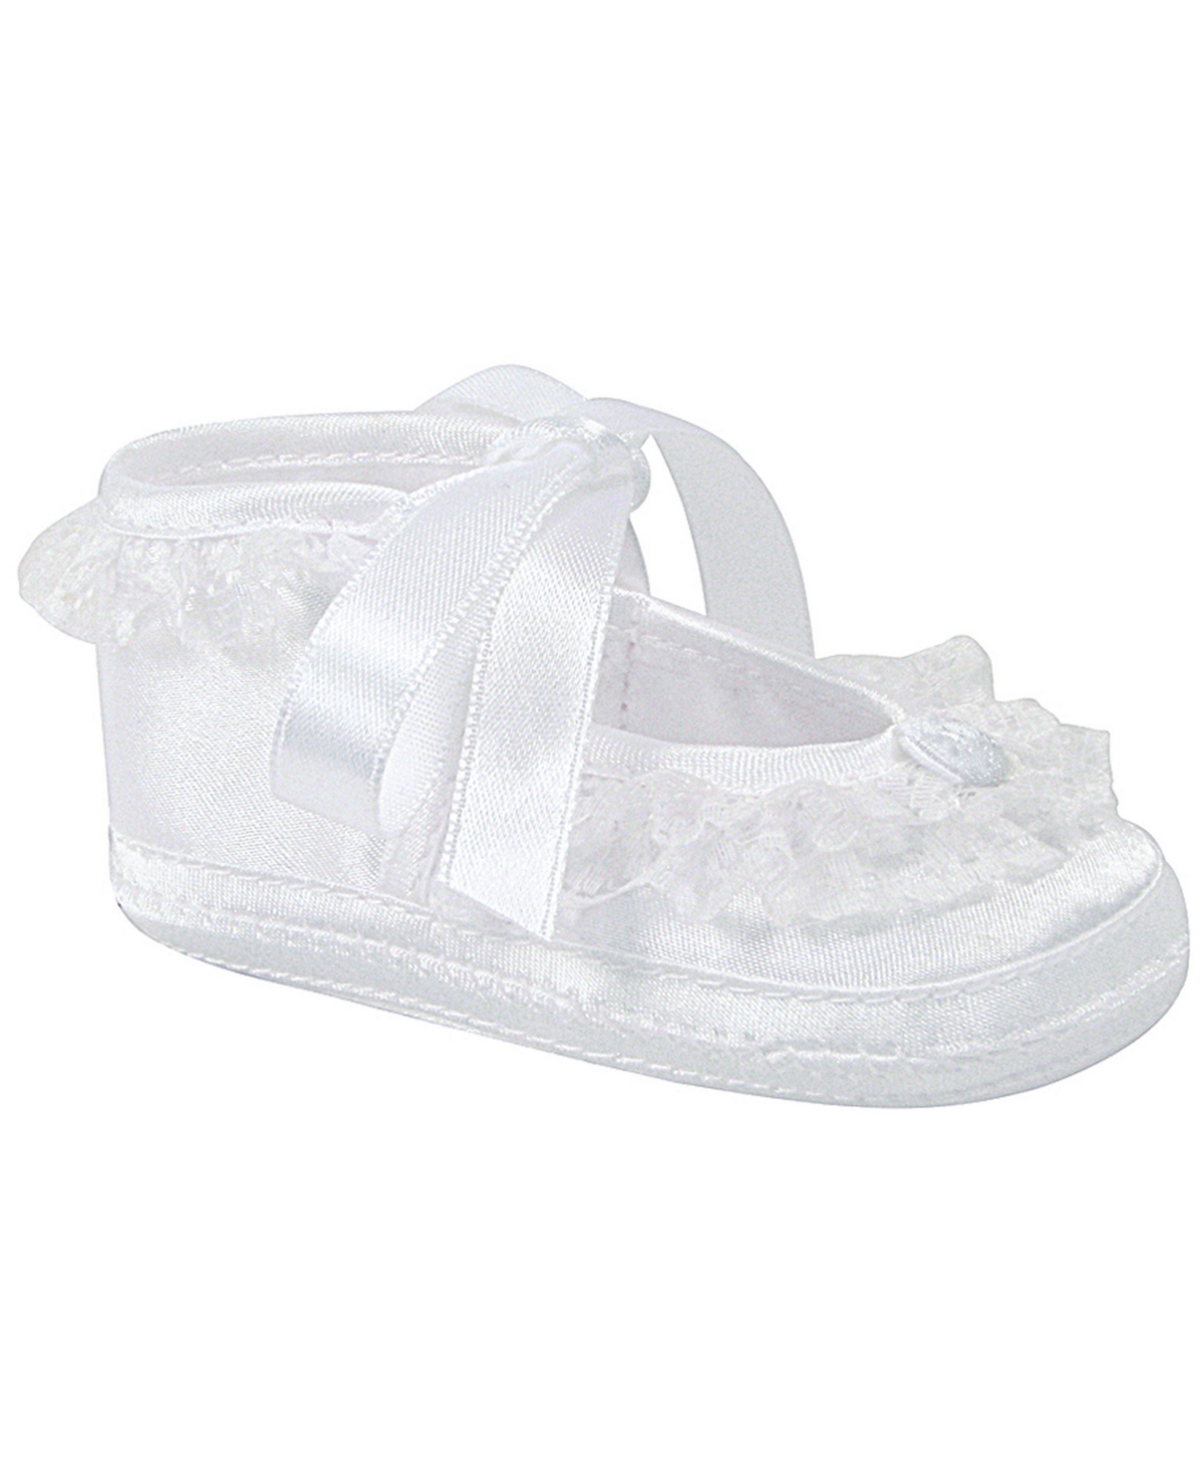 Baby Deer Baby Girl Satin Slipper With Lace Trim And Satin Tie In White